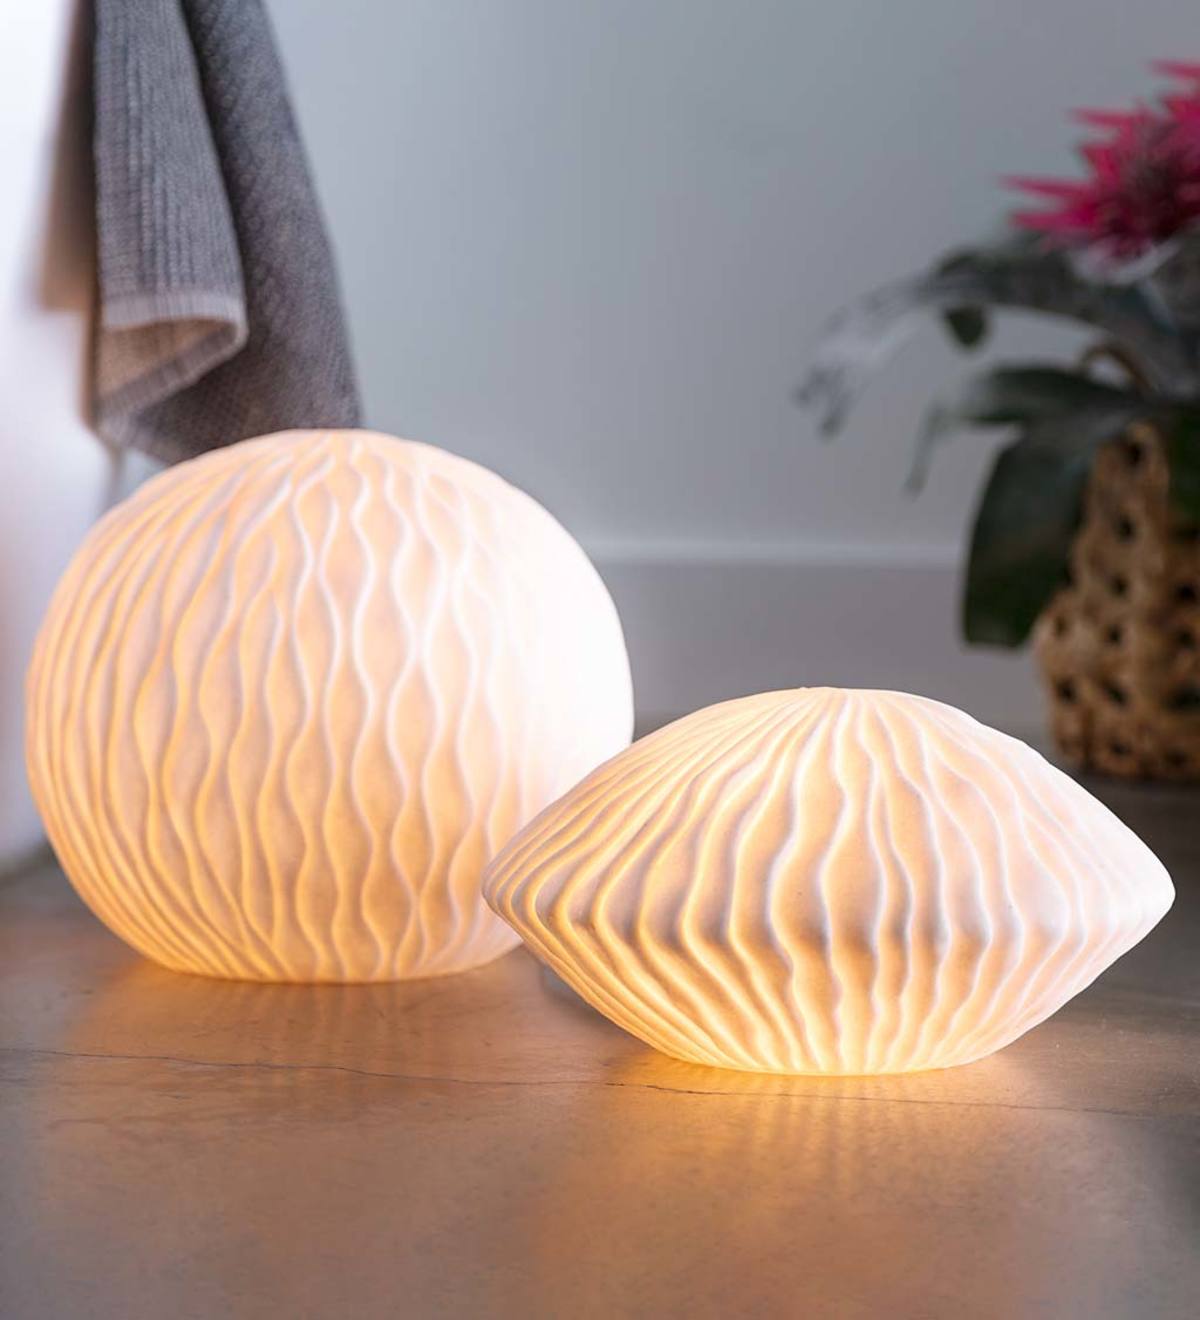 Sea Inspired Lighted Globe Lamps